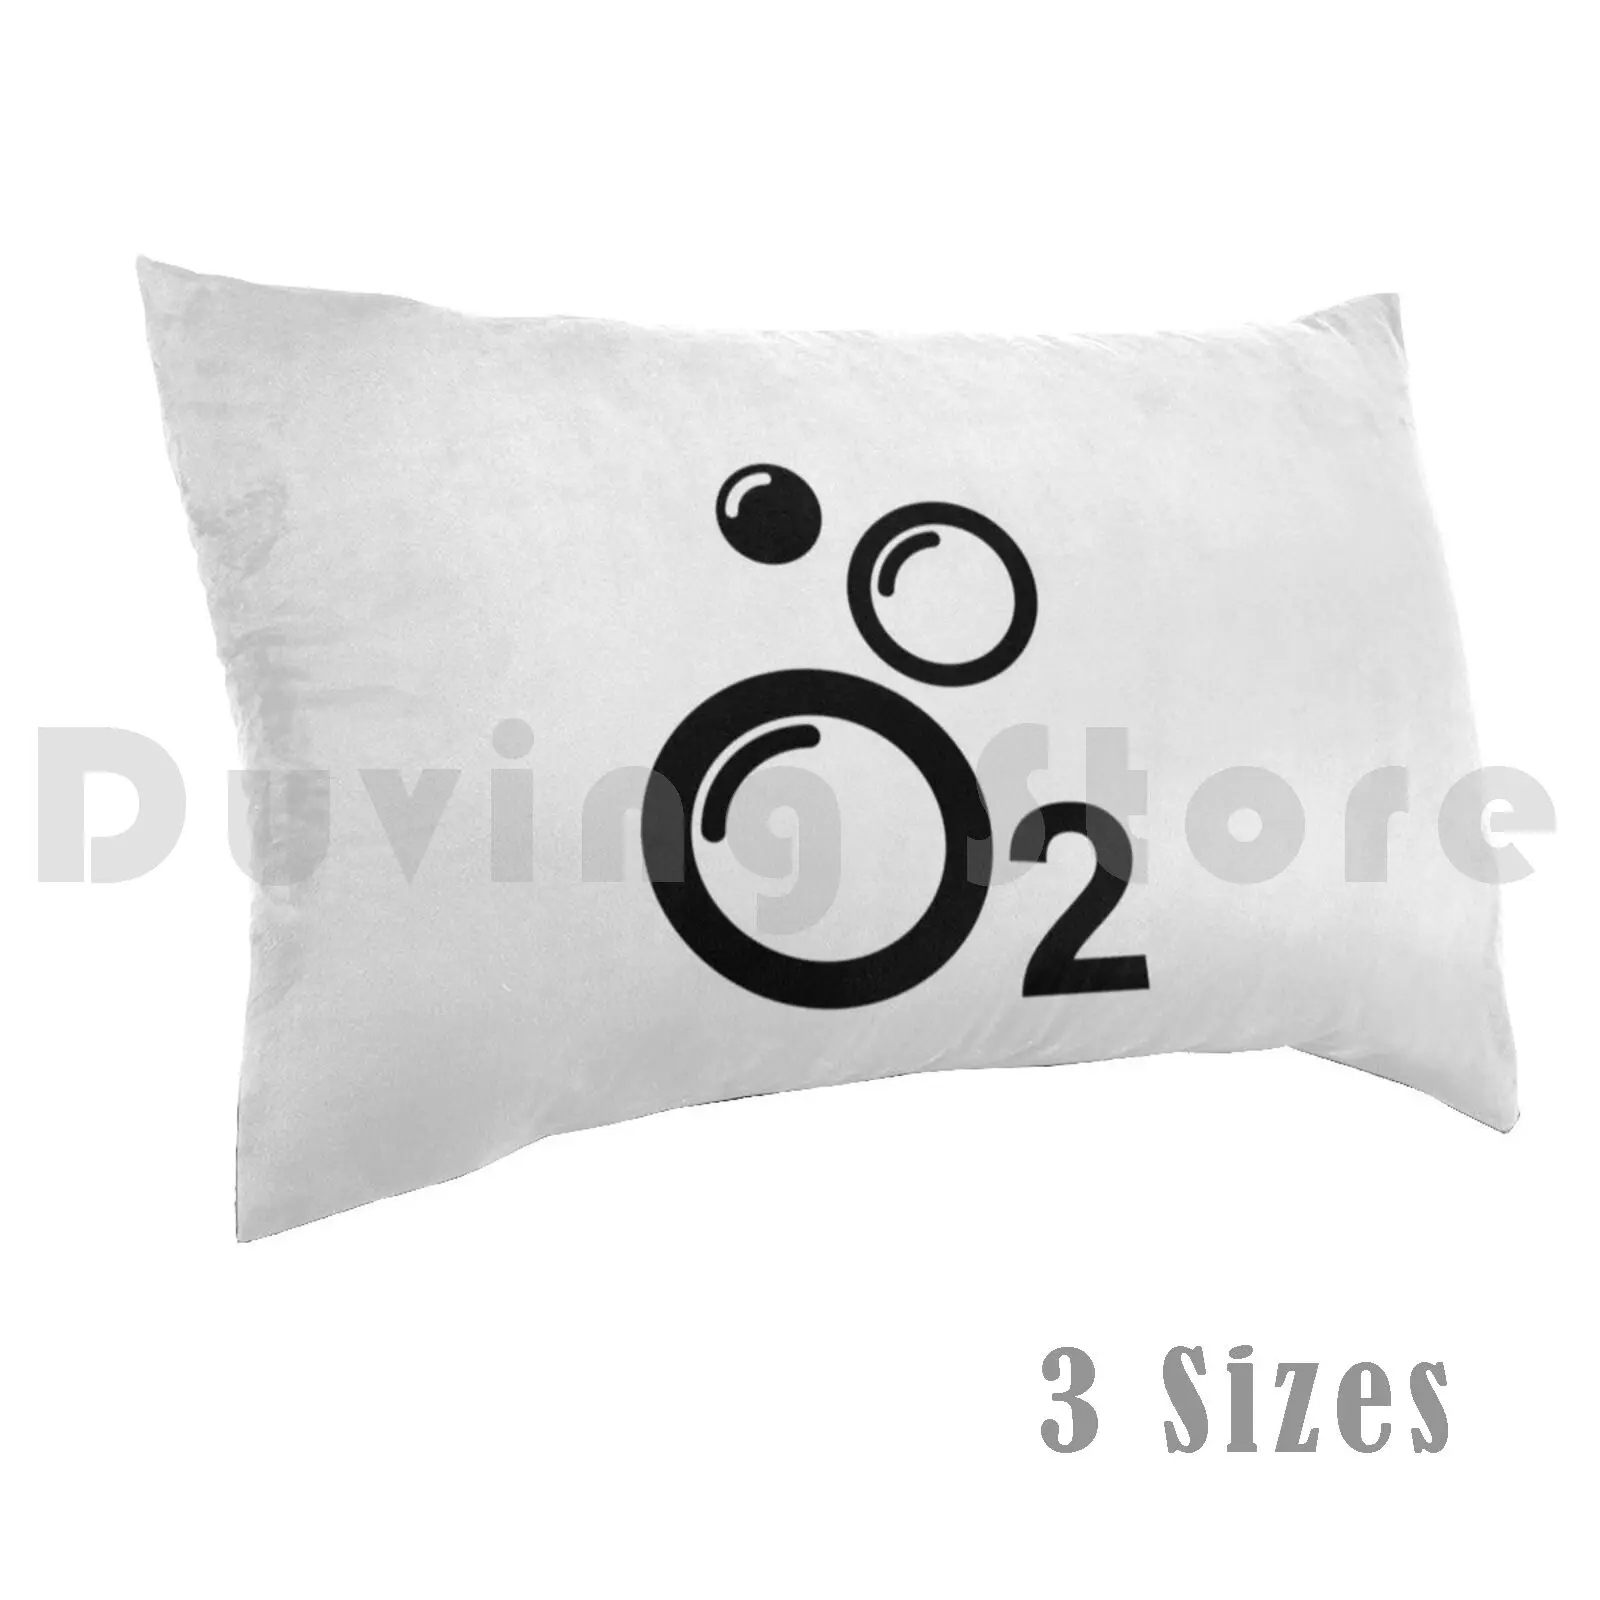 

Life Is About 02 Oxygen Pillow Case DIY 50x75 Beaker The Science Vintage Chemistry Experiment Fozzy Wakka Wakka Show